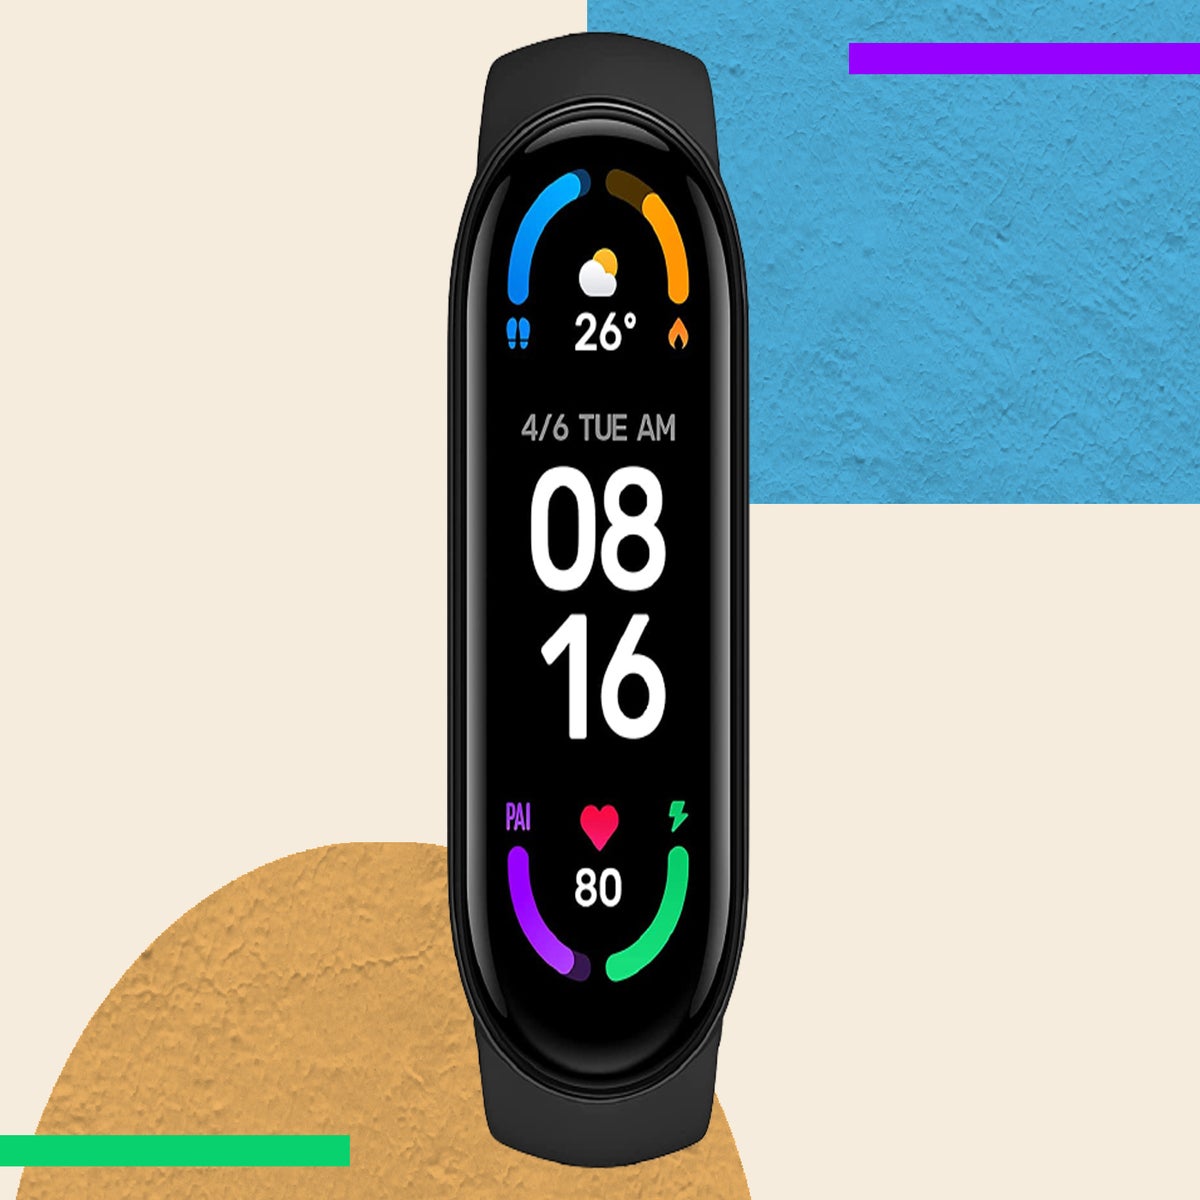 Xiaomi Mi Band 6, Tested on Land & Water